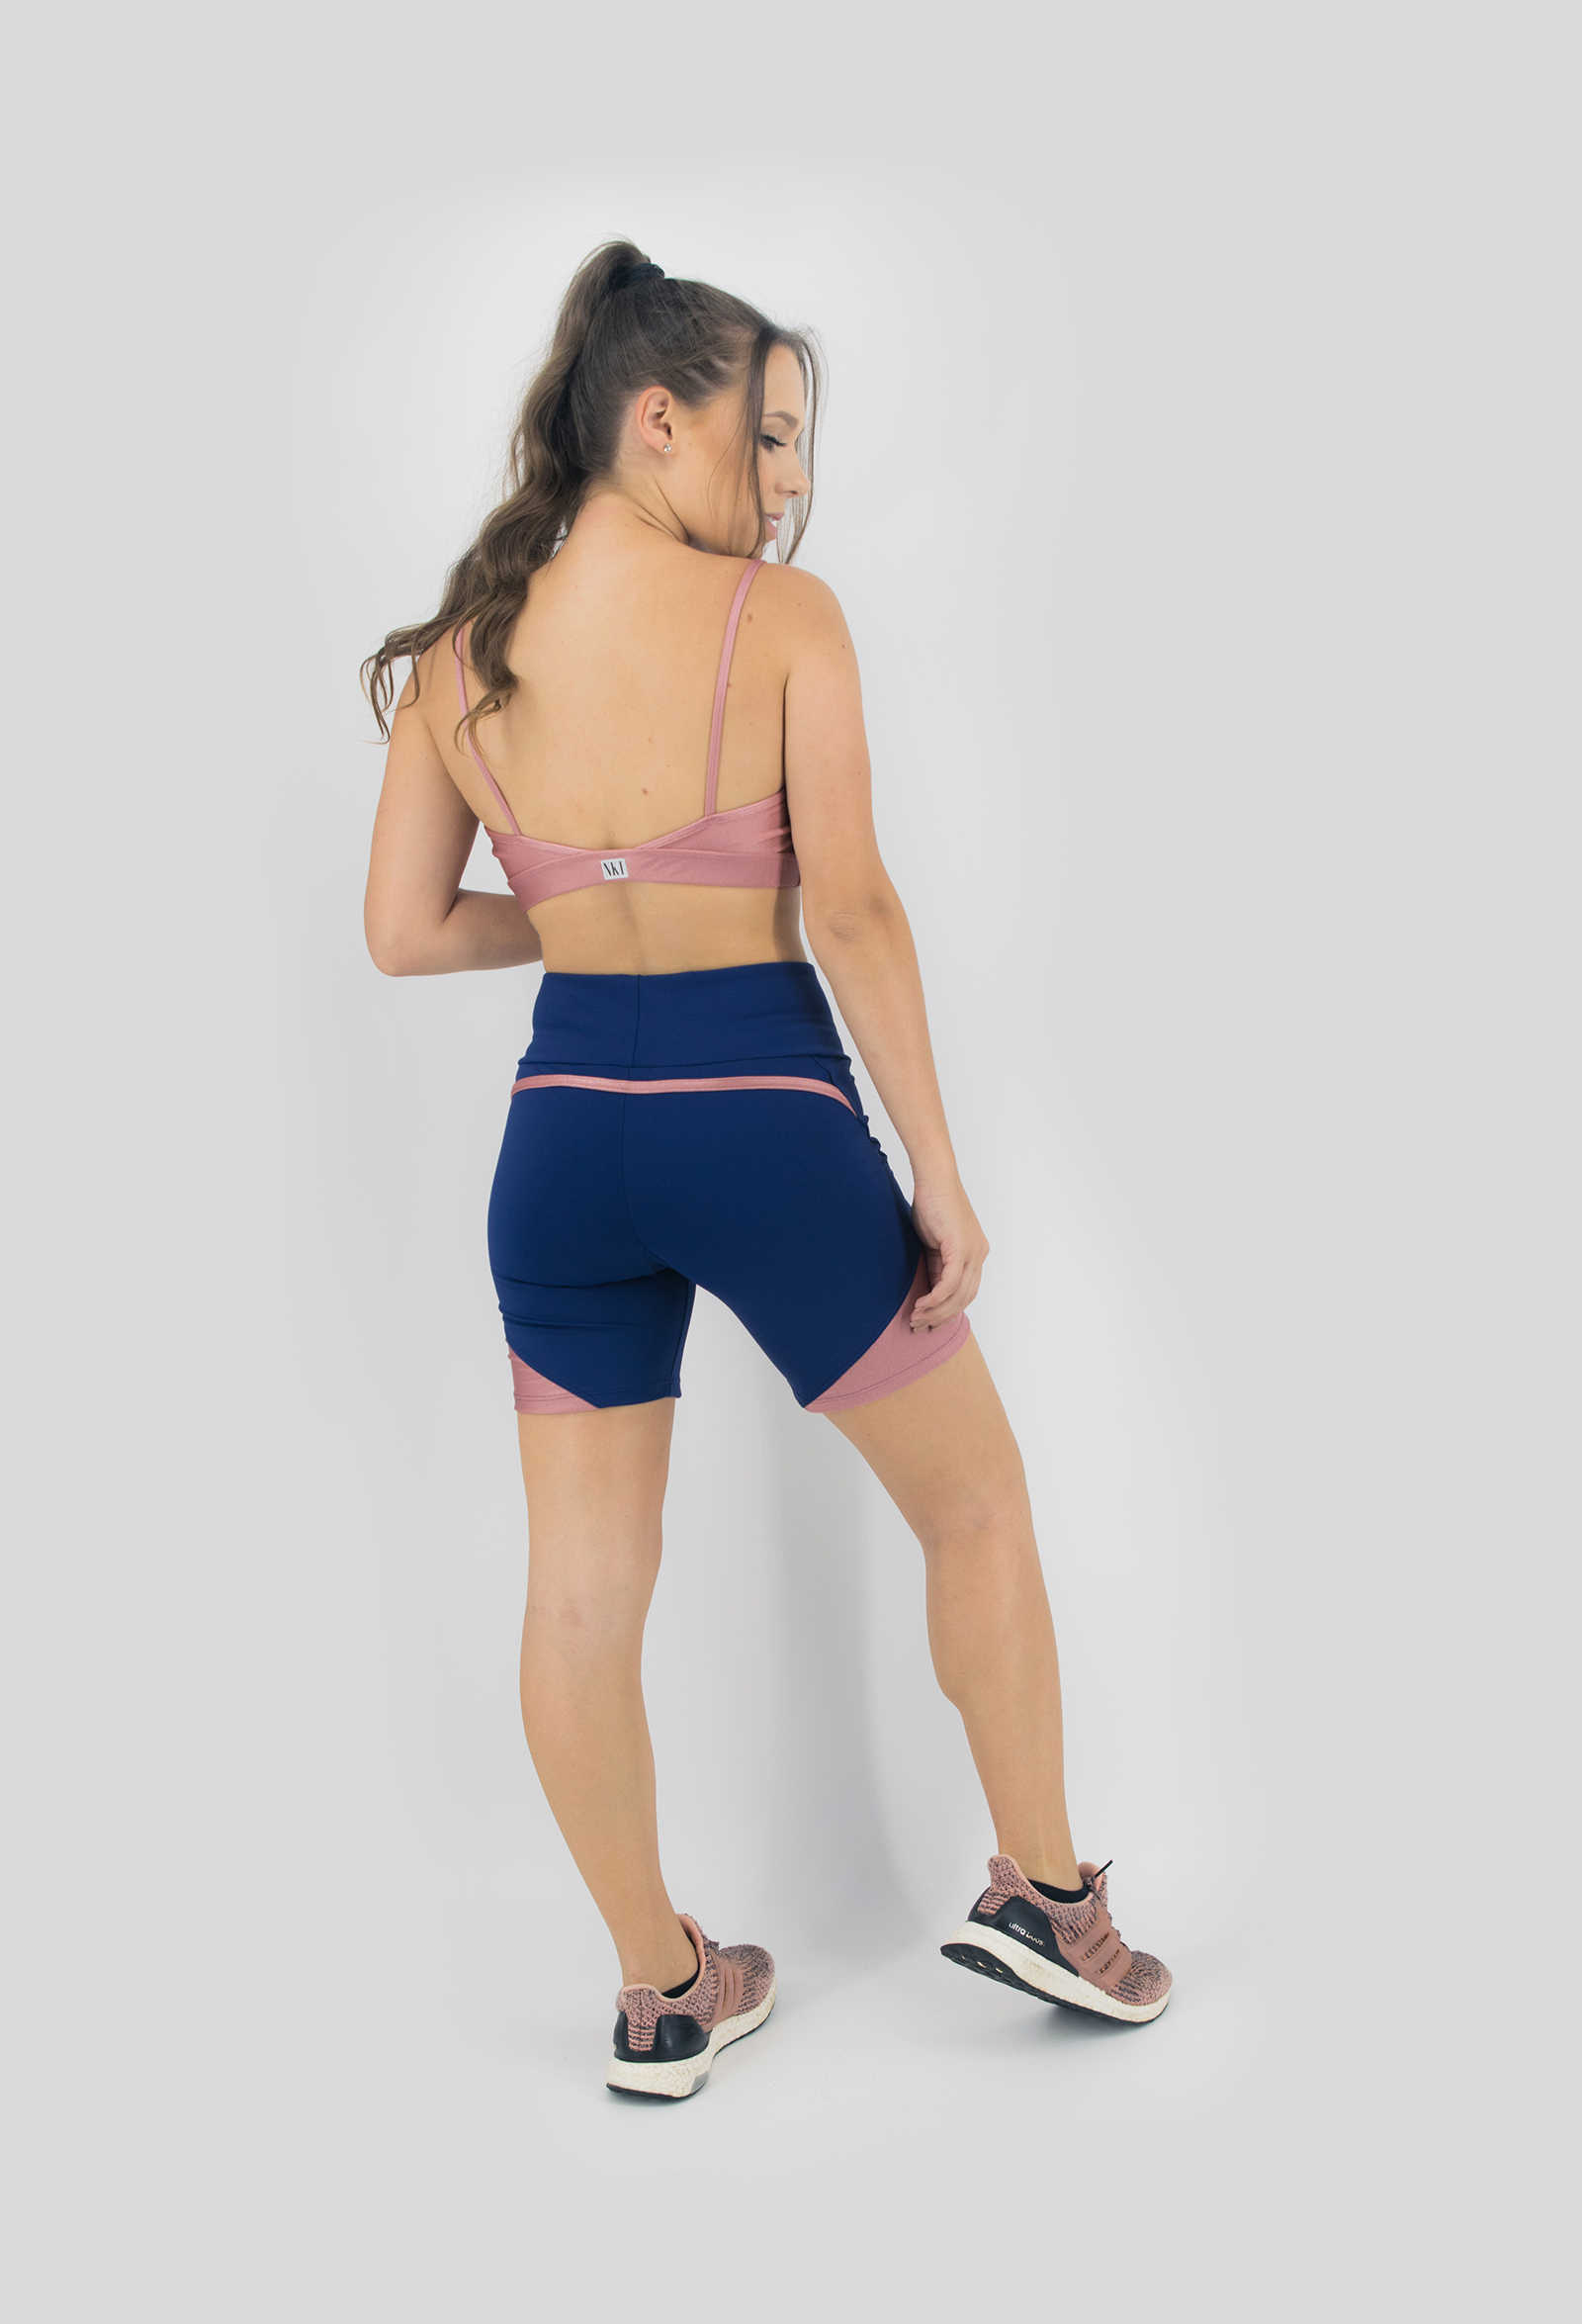 Top Profusion Coral, Coleção Move Your Body - NKT Fitwear Moda Fitness